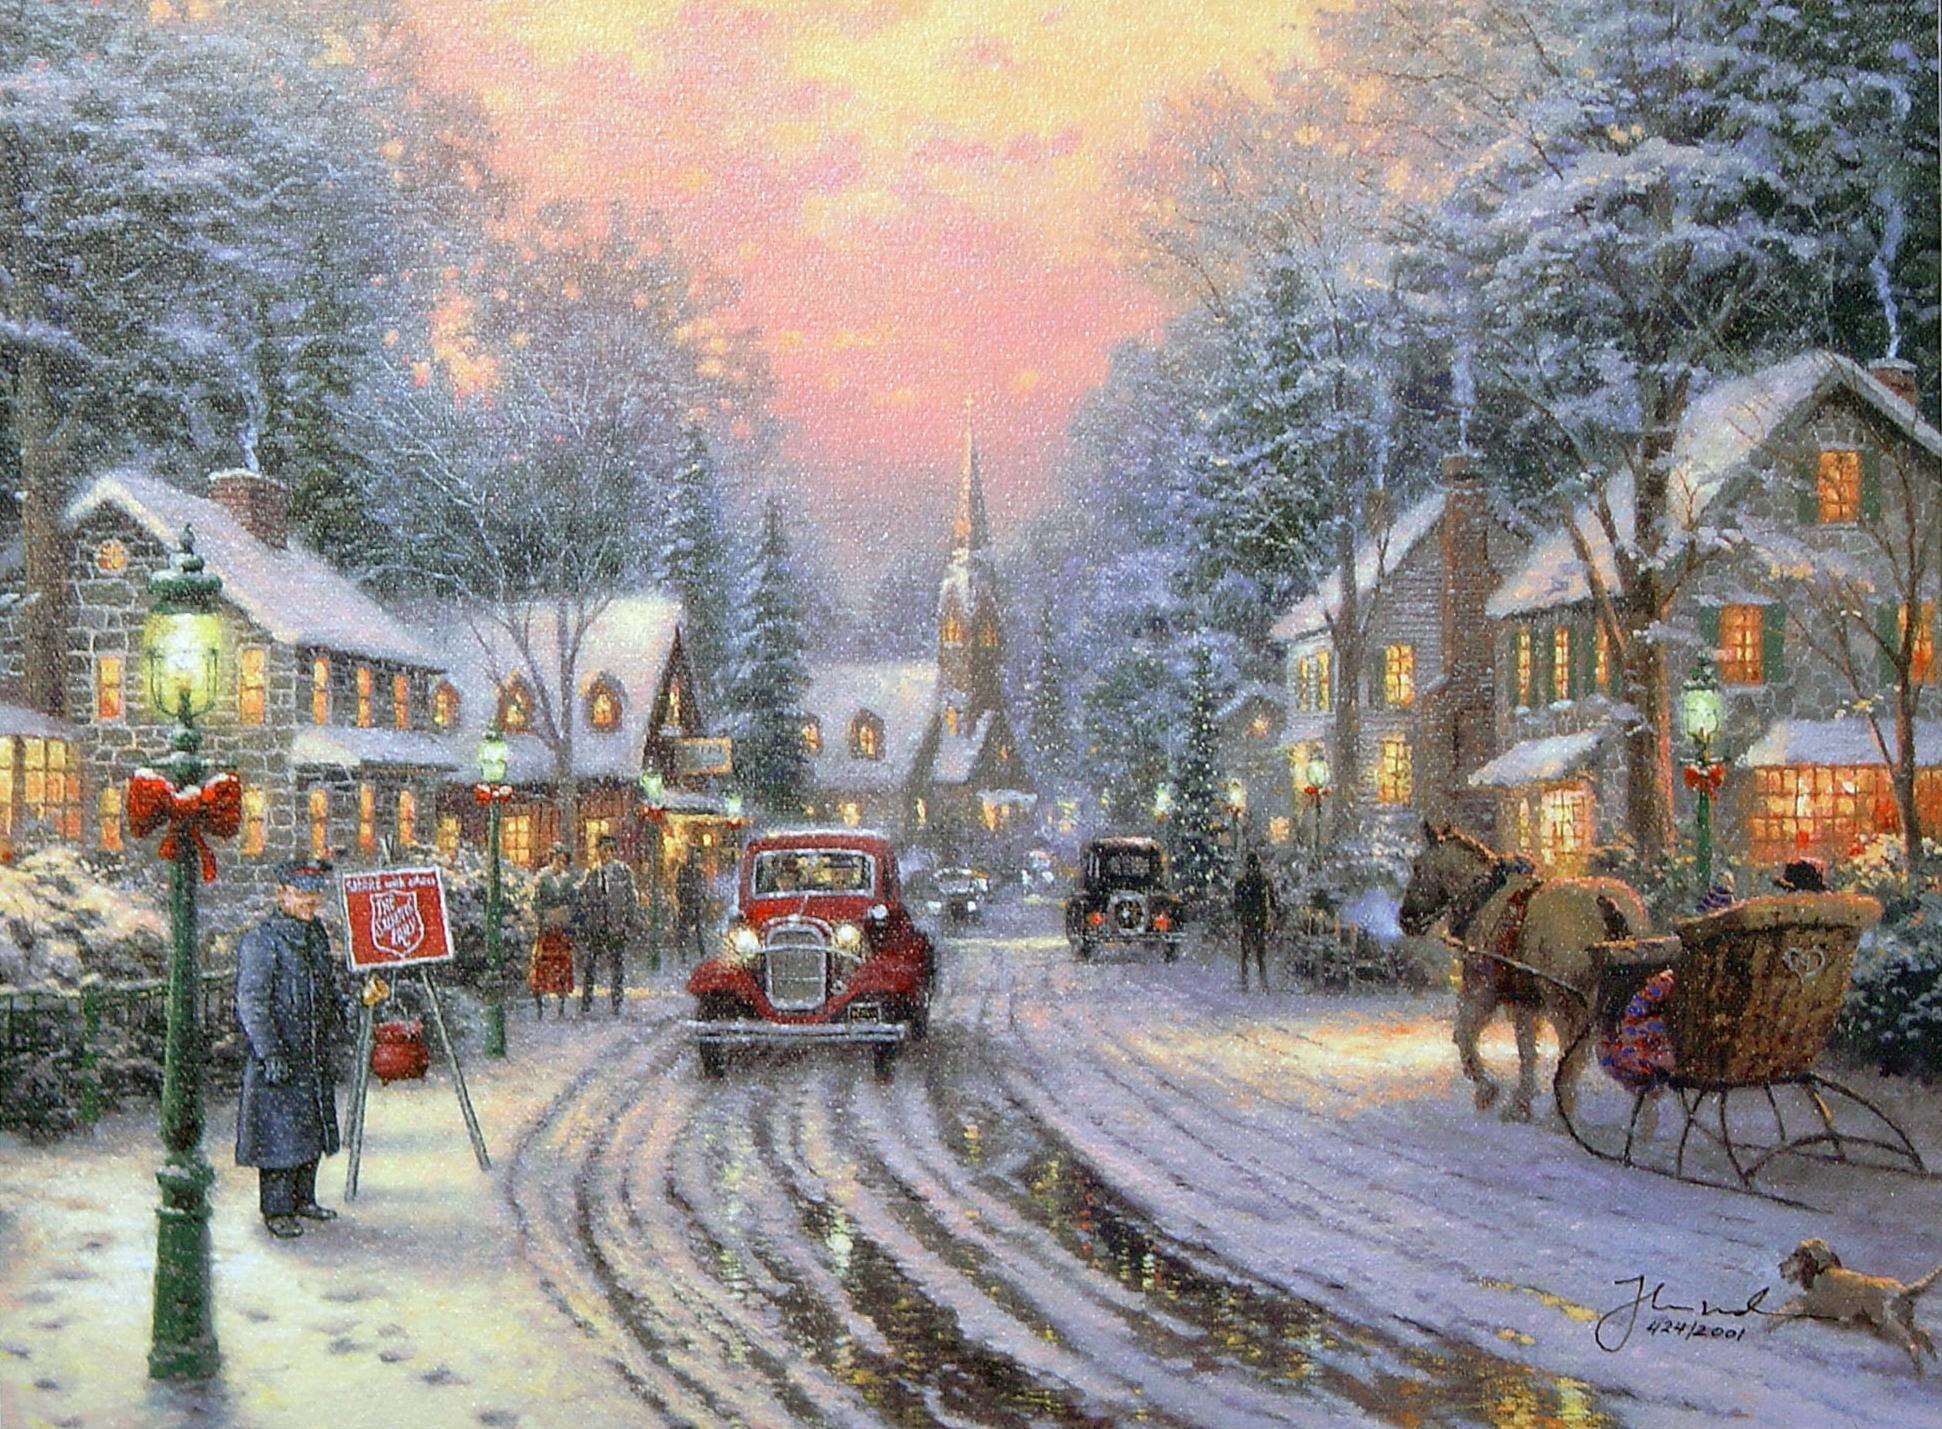 1942x1429 Awesome Thomas Kinkade Christmas Village Wallpaper of awesome full screen  HD wallpapers to download for free